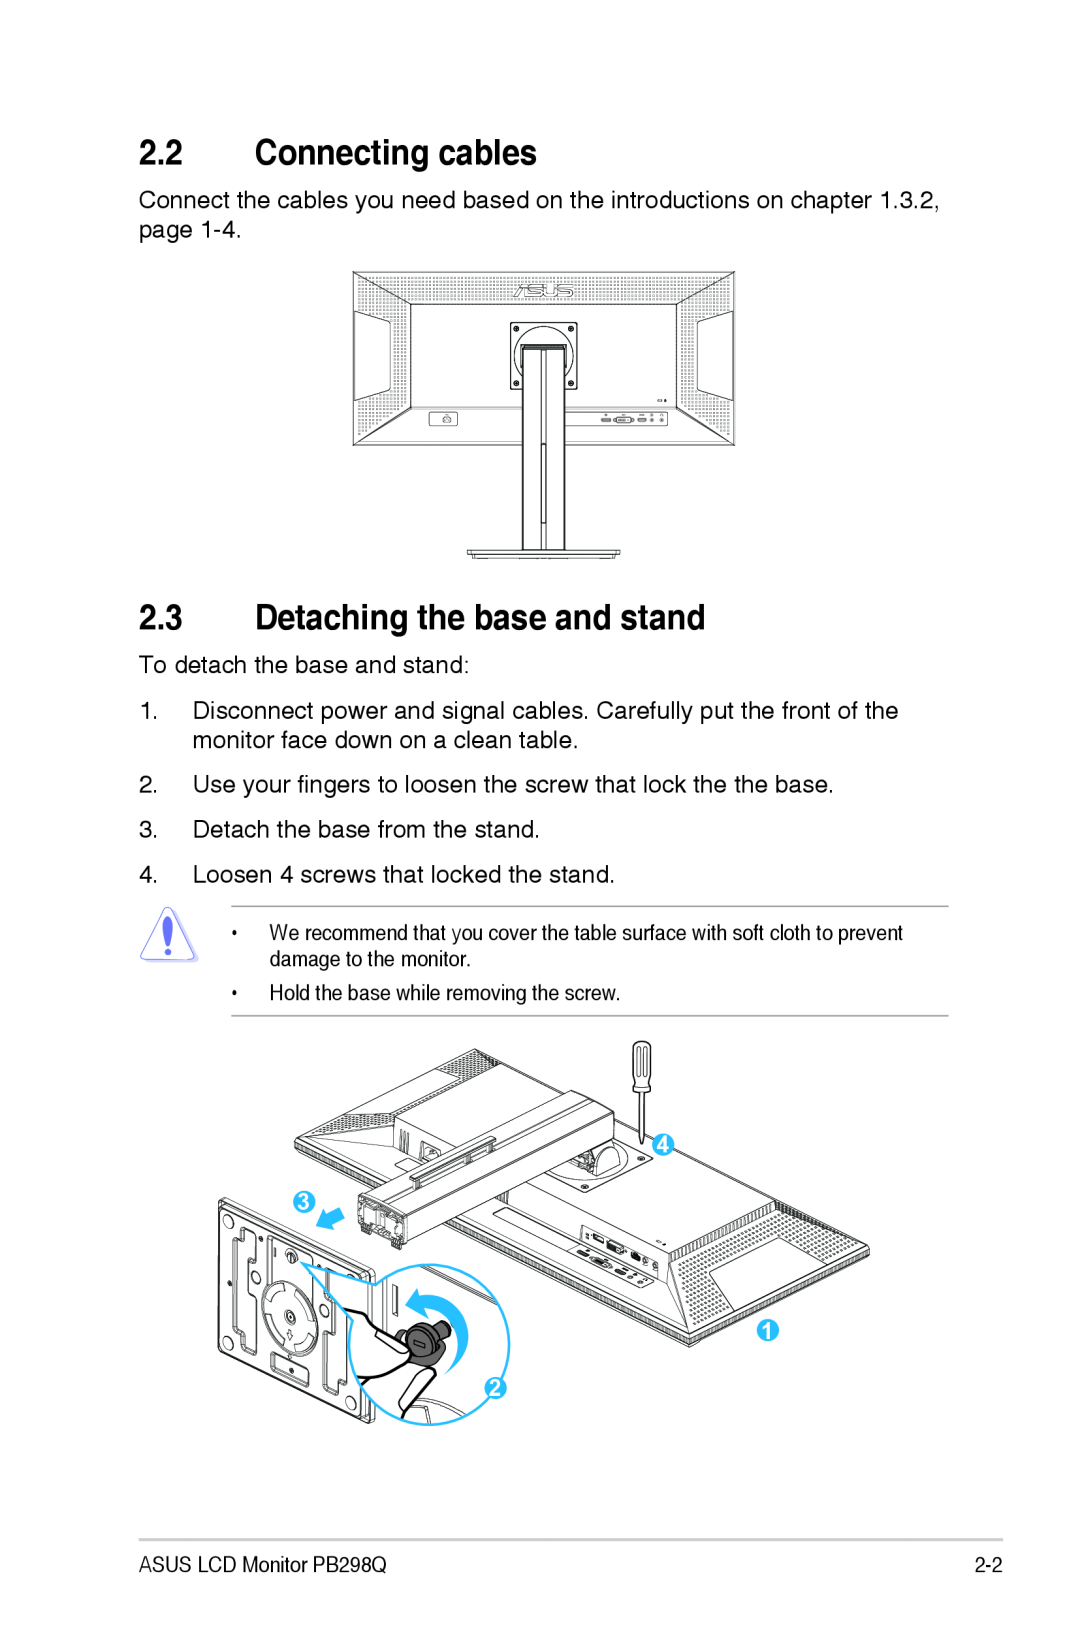 Asus PB298Q manual Connecting cables, Detaching the base and stand 